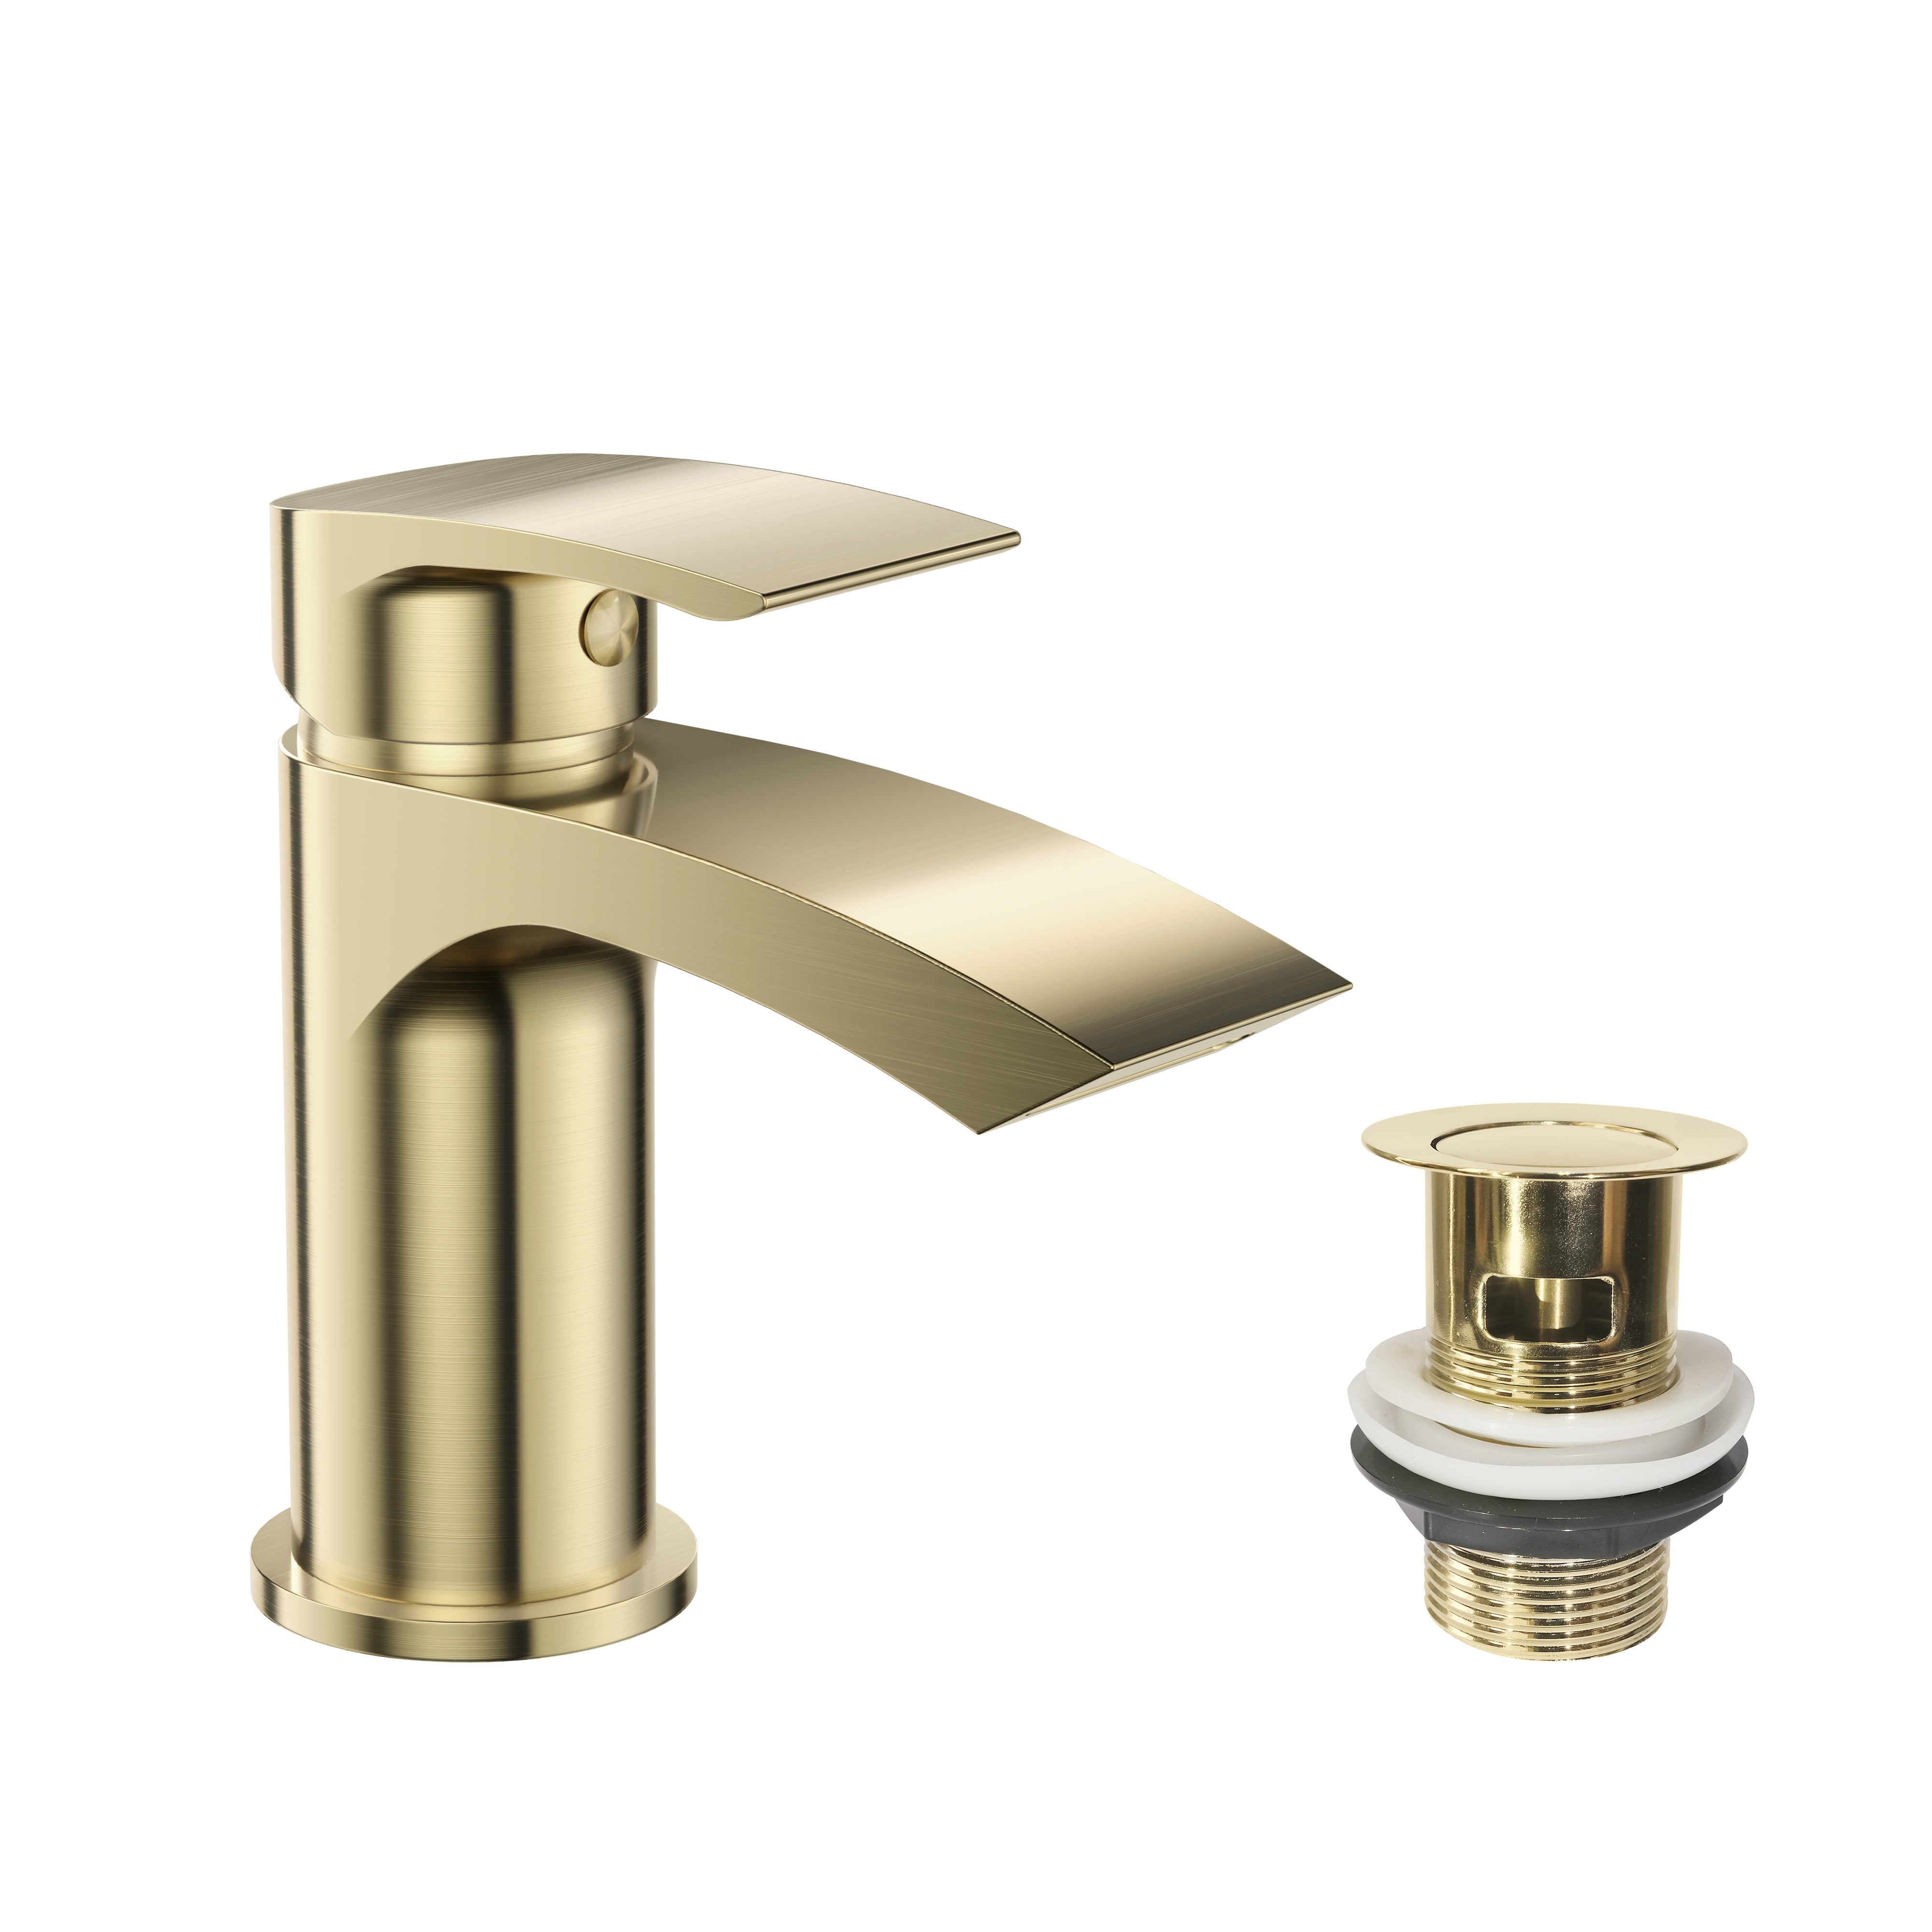 Carter Mono Basin Mixer with Waste - Brushed Brass